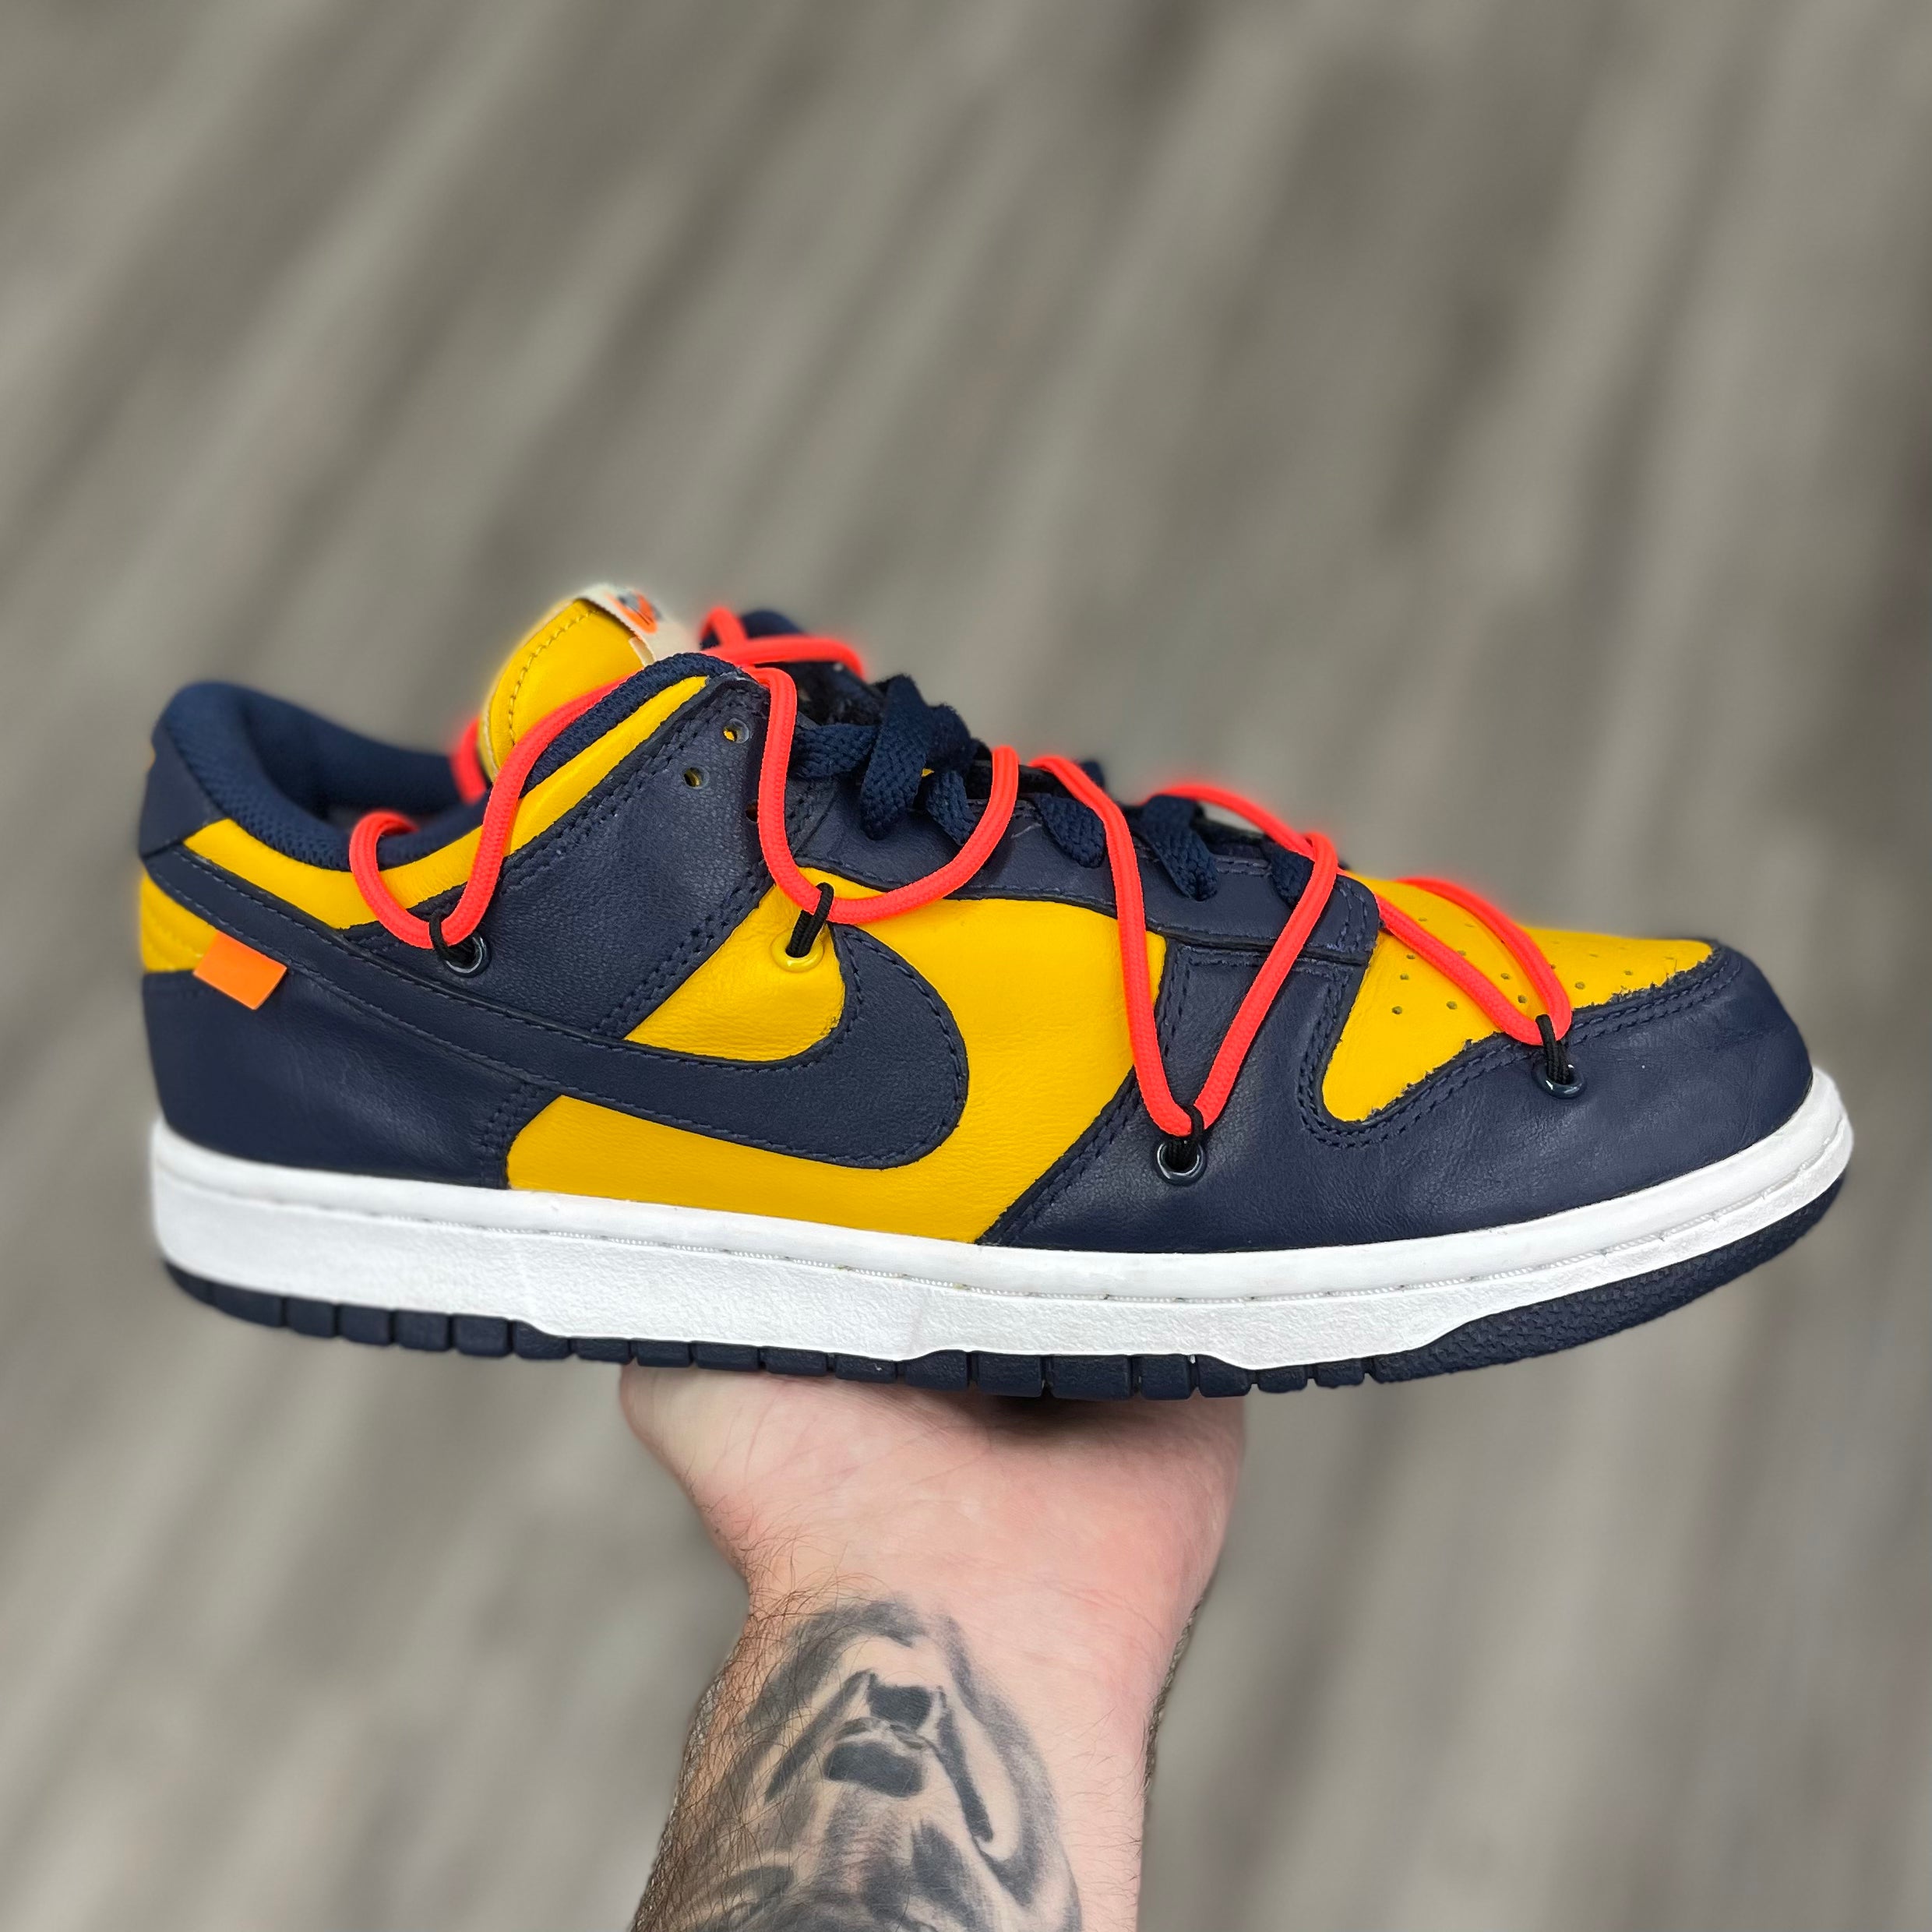 Nike Dunk Low “Off White University Gold Midnight Navy”